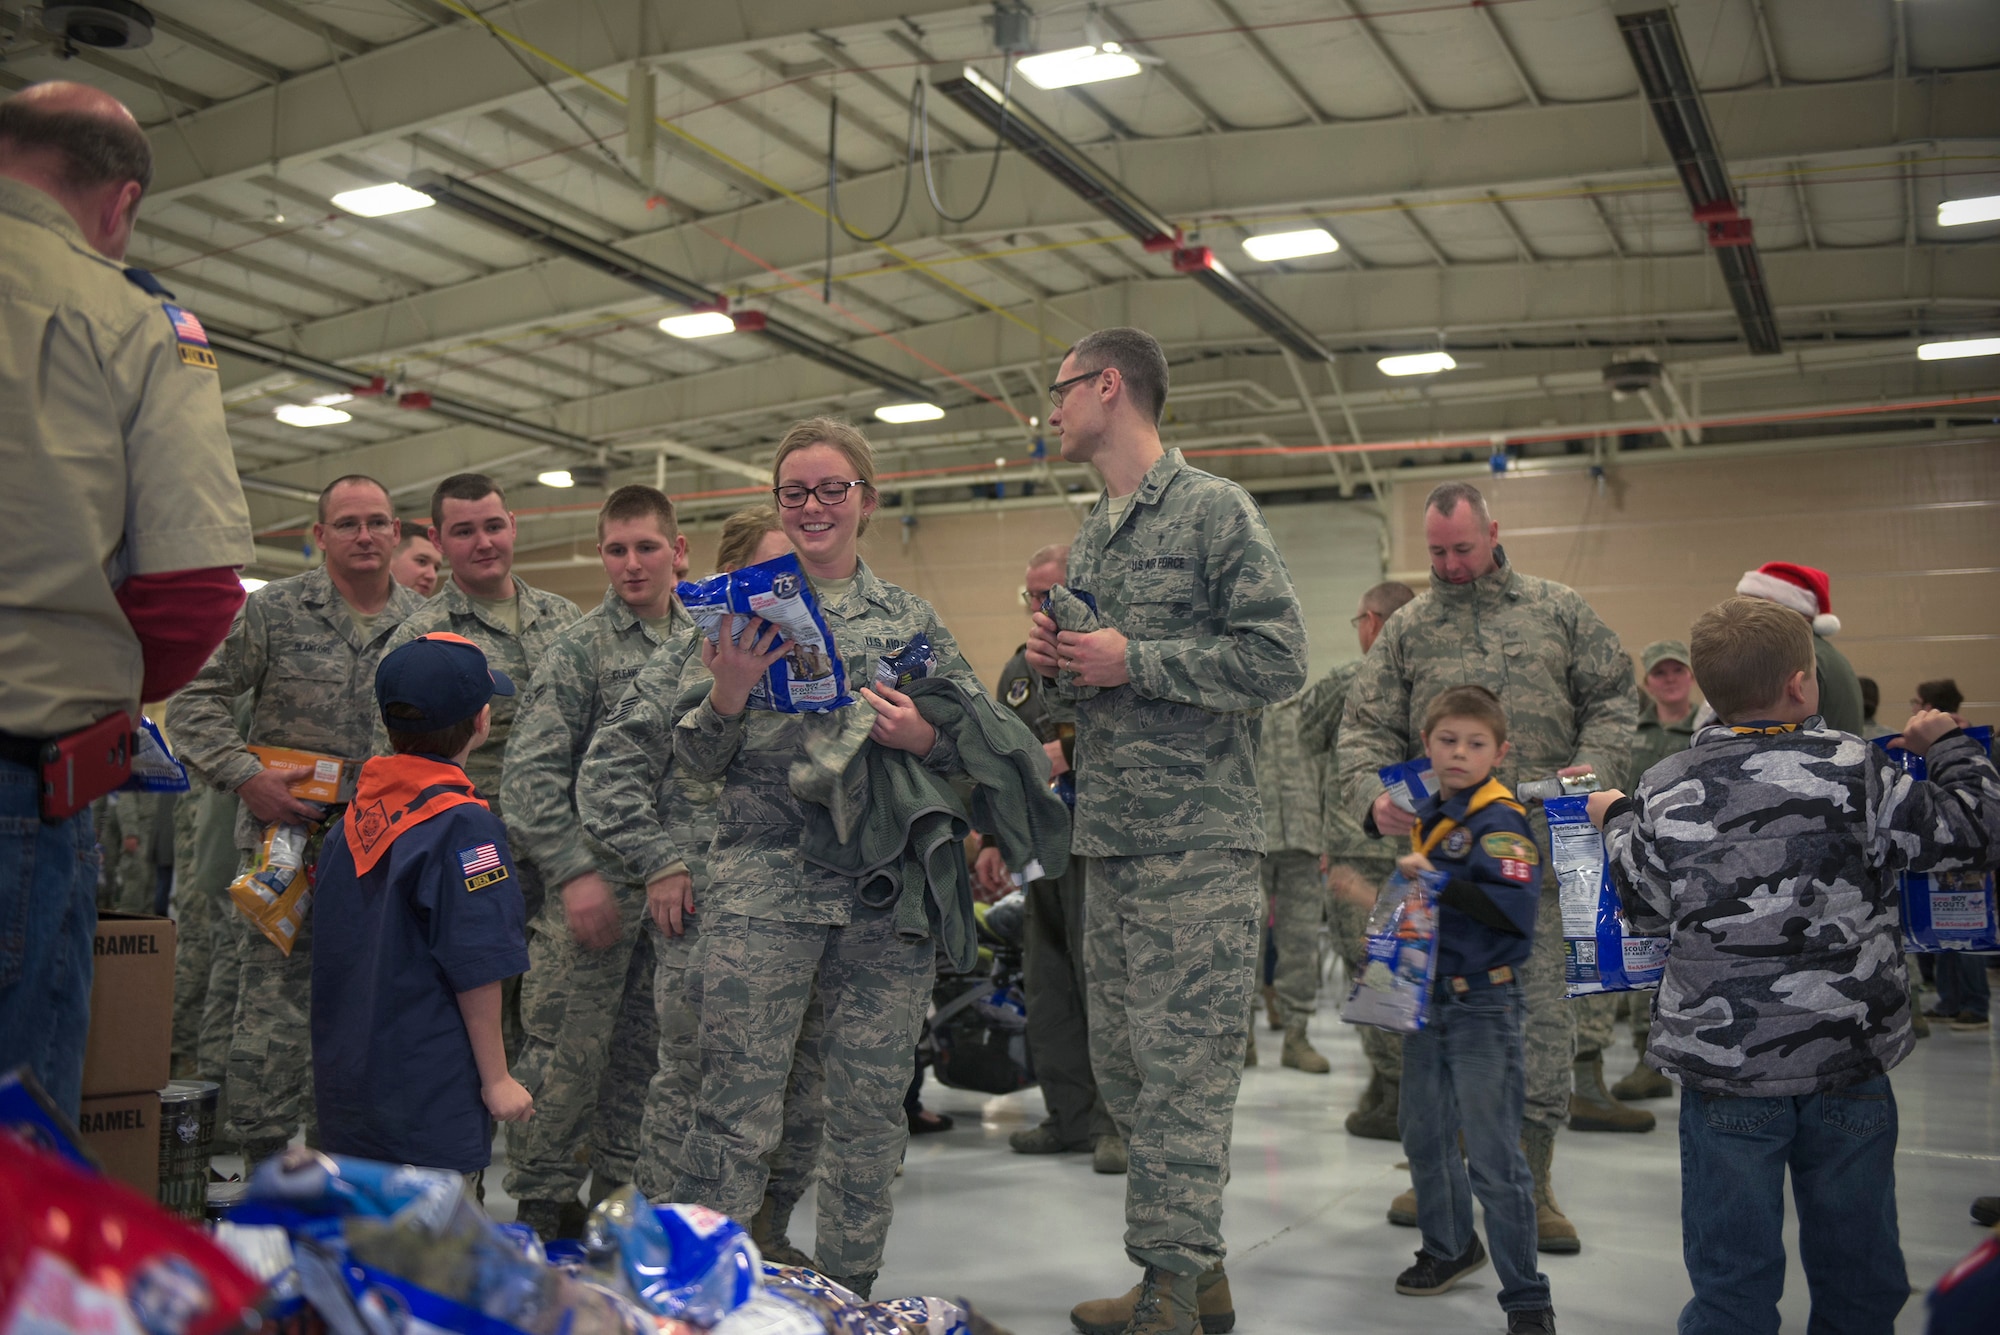 Boy Scouts from W.D. Boyce Council distribute donated popcorn to Airmen with 182nd Airlift Wing, Illinois Air National Guard, in Peoria, Ill., Dec. 3, 2016. The scouts’ donation coincided with wing’s annual holiday party. (U.S. Air National Guard photo by Tech. Sgt. Lealan Buehrer)